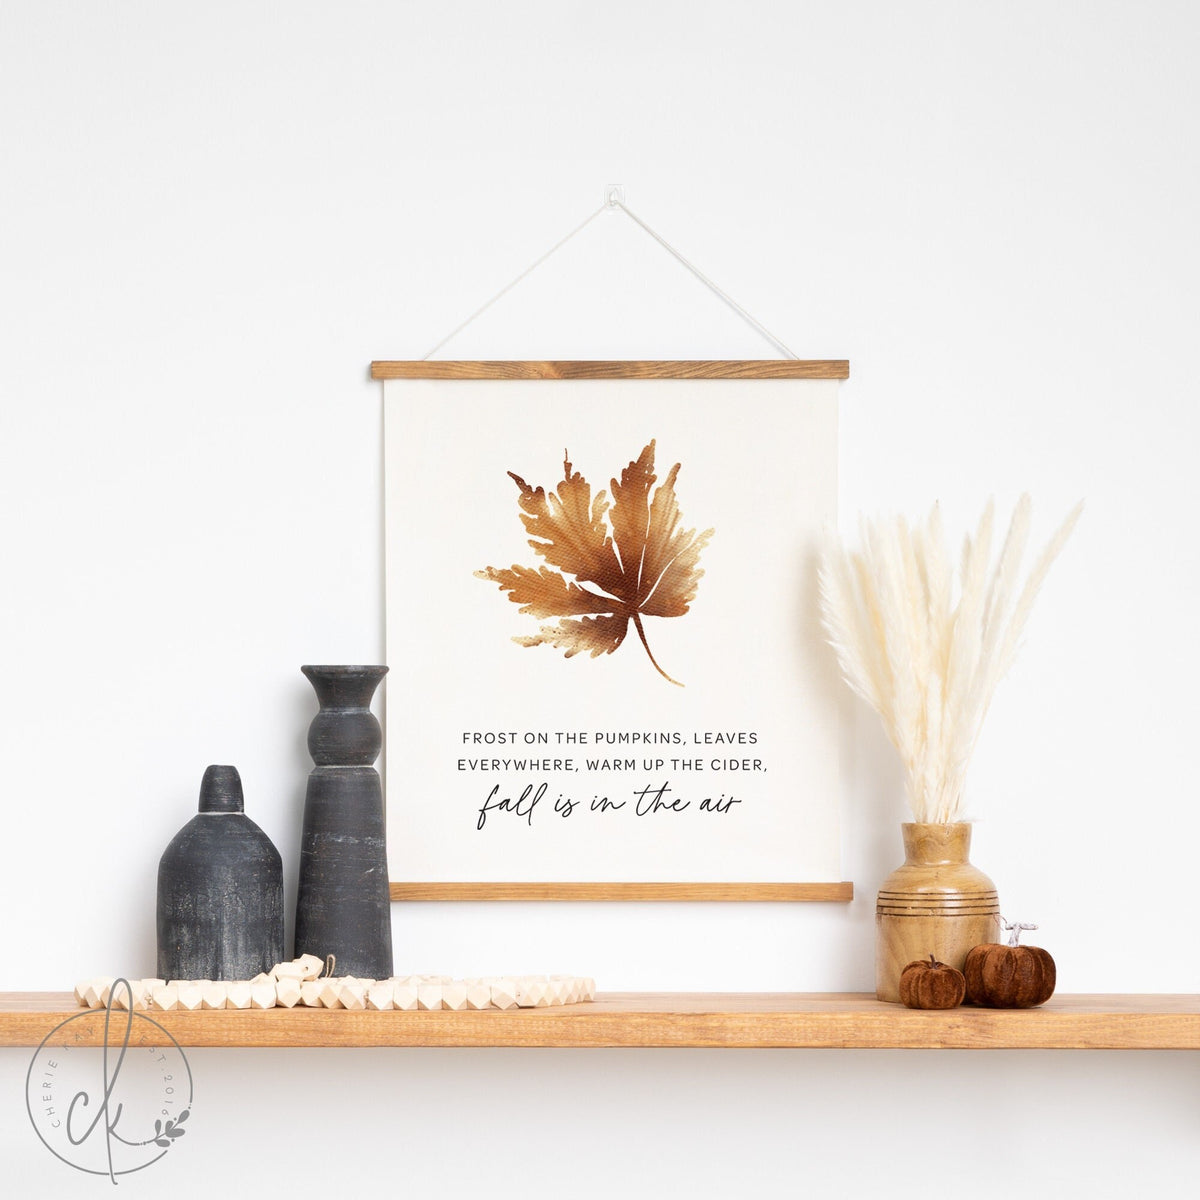 Fall Wall Decor | Frost On The Pumpkins | Fabric Wall Hanging | Living Room Wall Art | Fall Decor | Canvas Art | Fall Quote | Autumn Decor